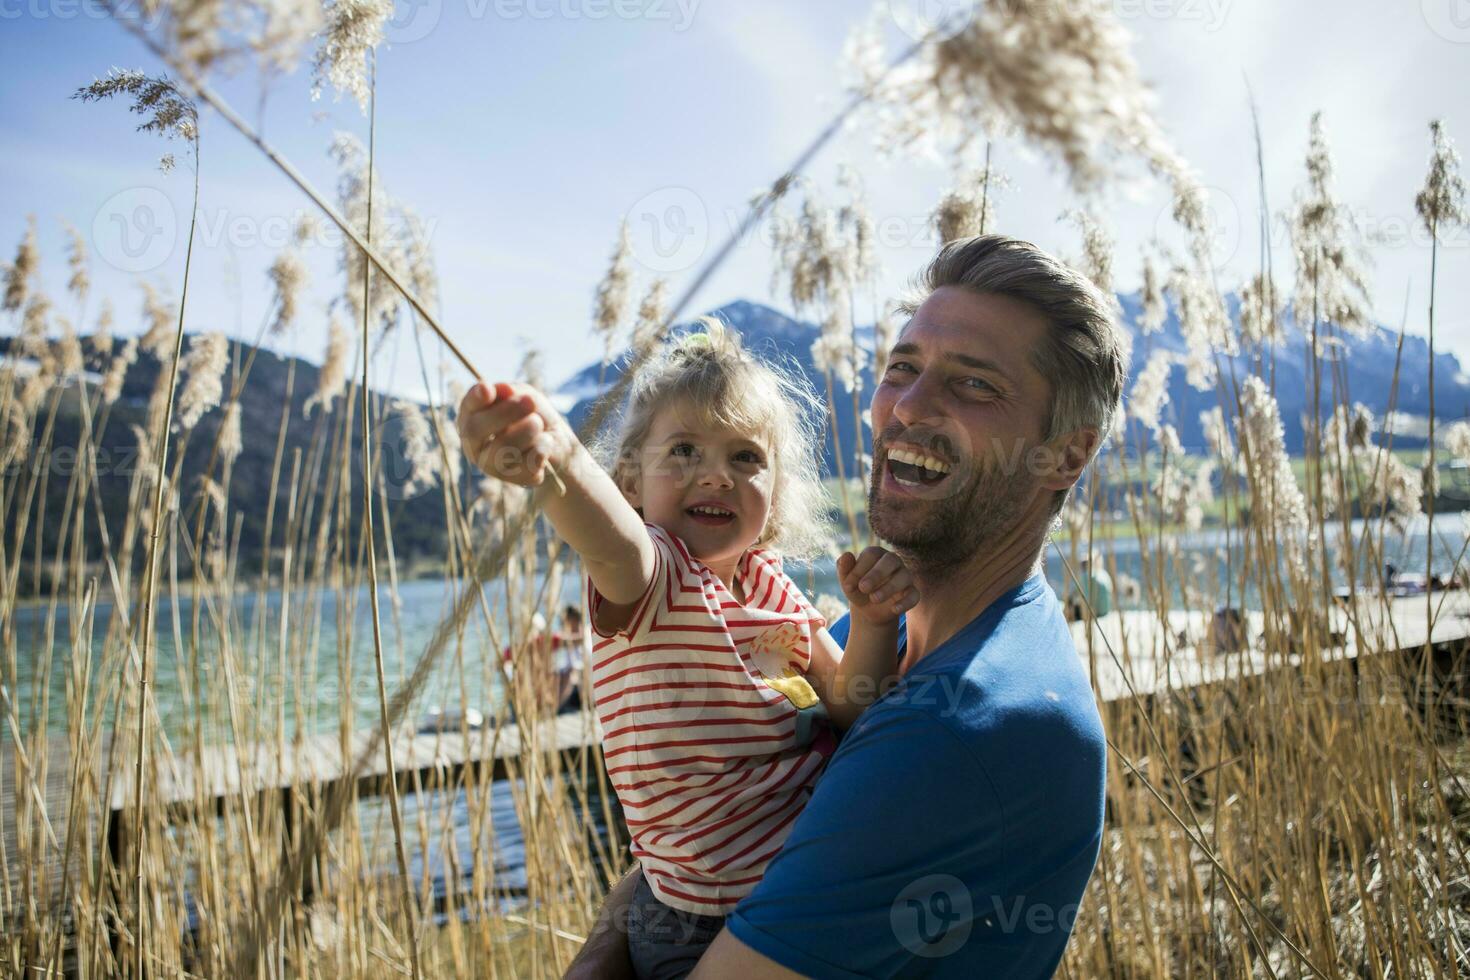 Austria, Tyrol, Walchsee, happy father carrying daughter in reeds at the lakeshore photo